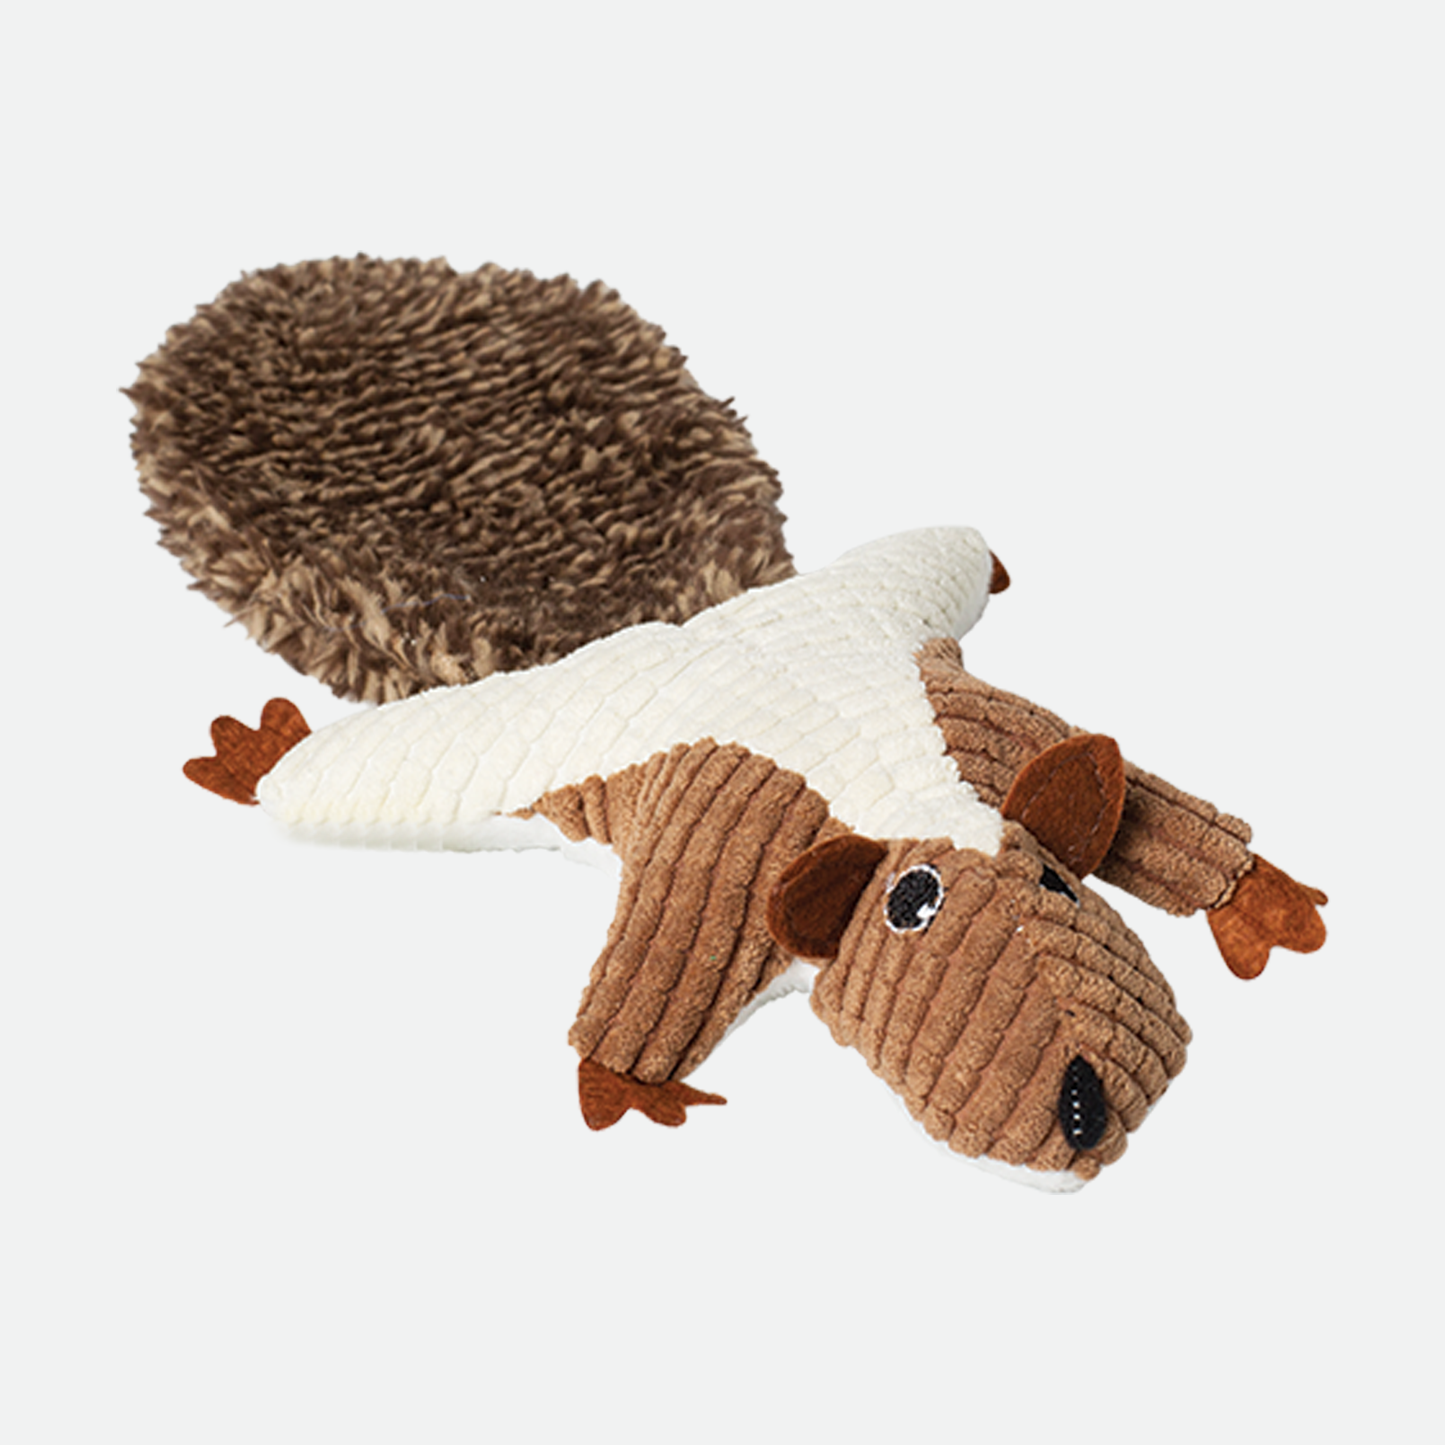 Plush toy for cat, squirrel style